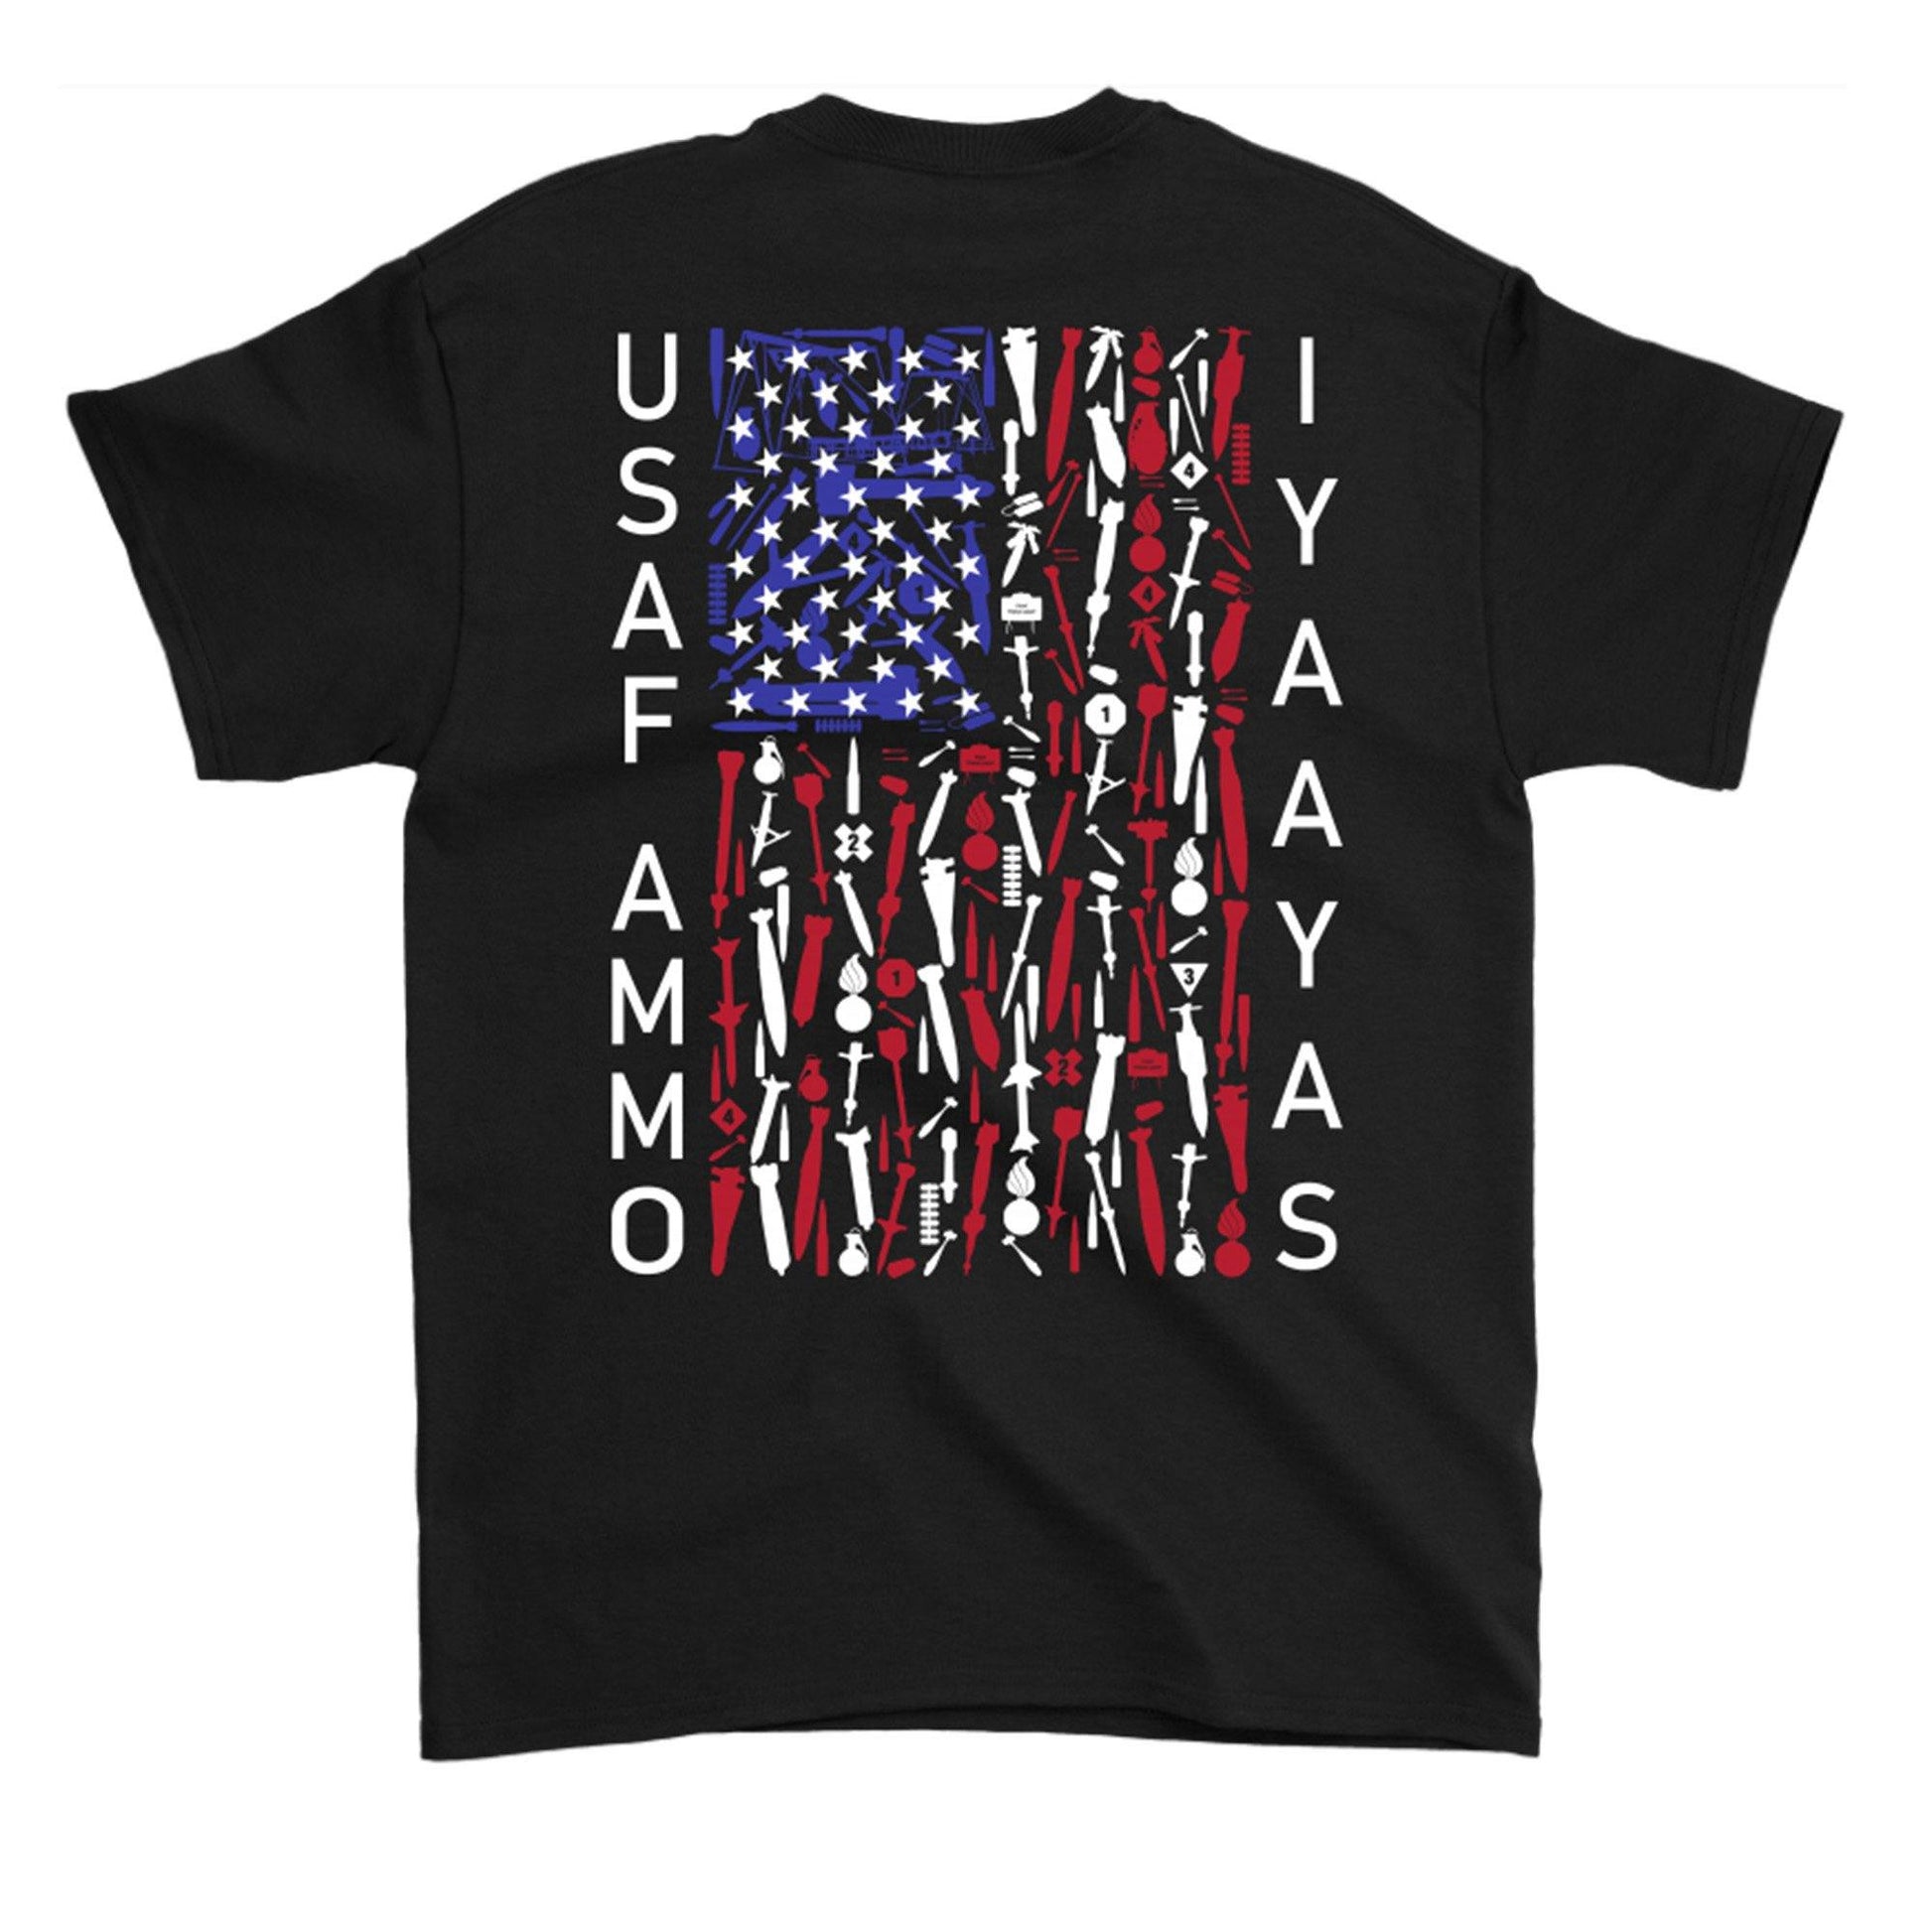 USAF AMMO American Flag Made from AMMO Icons and Images Unisex Gift T-Shirt - AMMO Pisspot IYAAYAS Gear